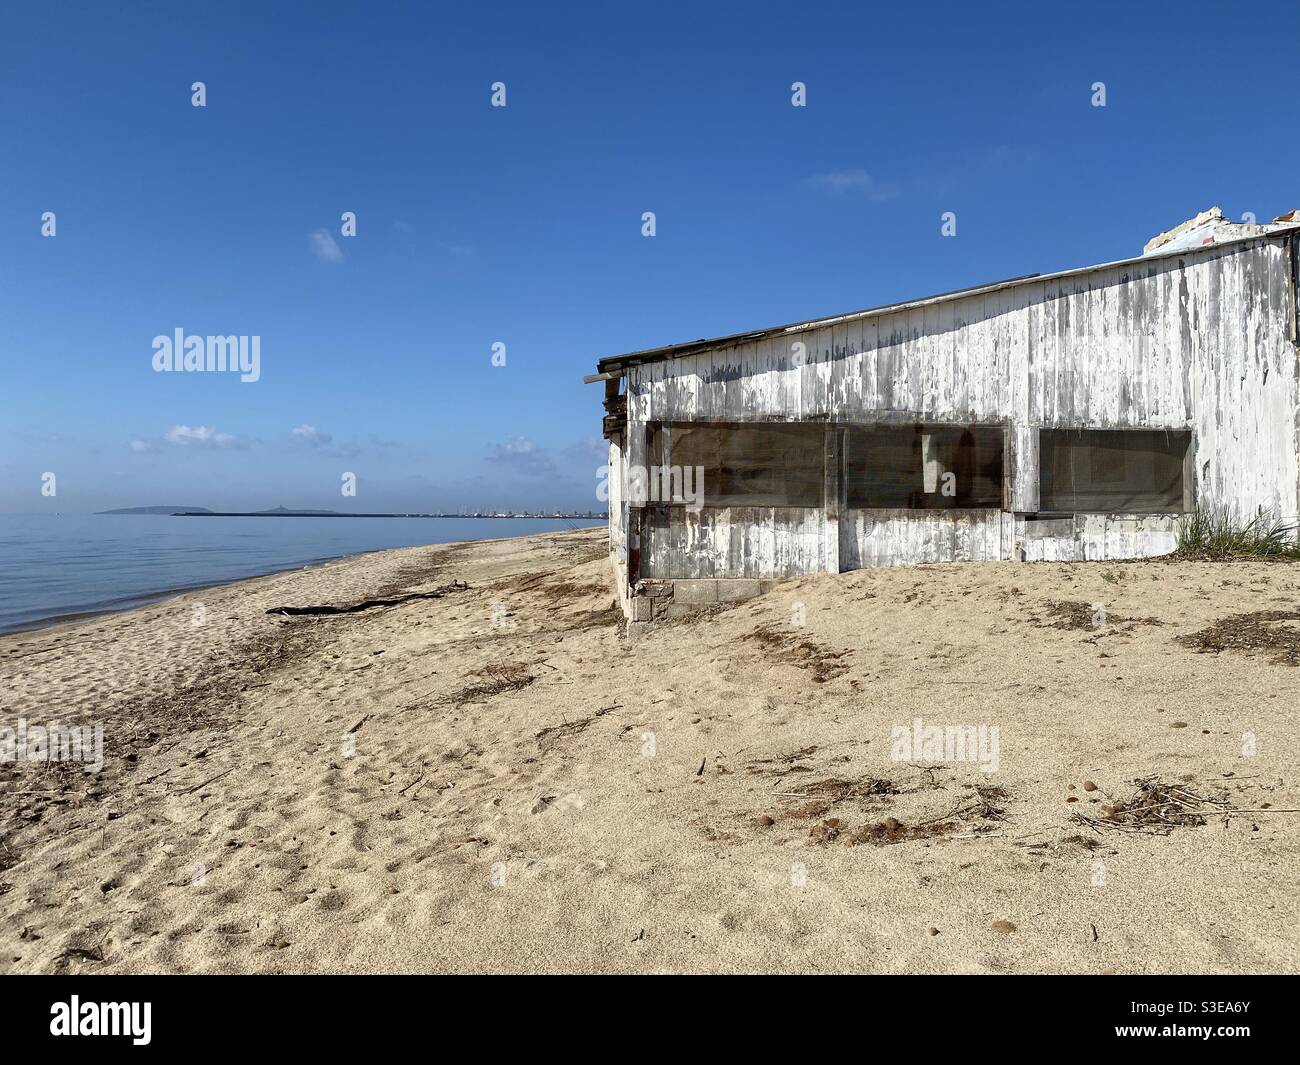 A dismissed beach restaurant made of wood and washed out by saltiness, bad weather and the passing of time. Stock Photo